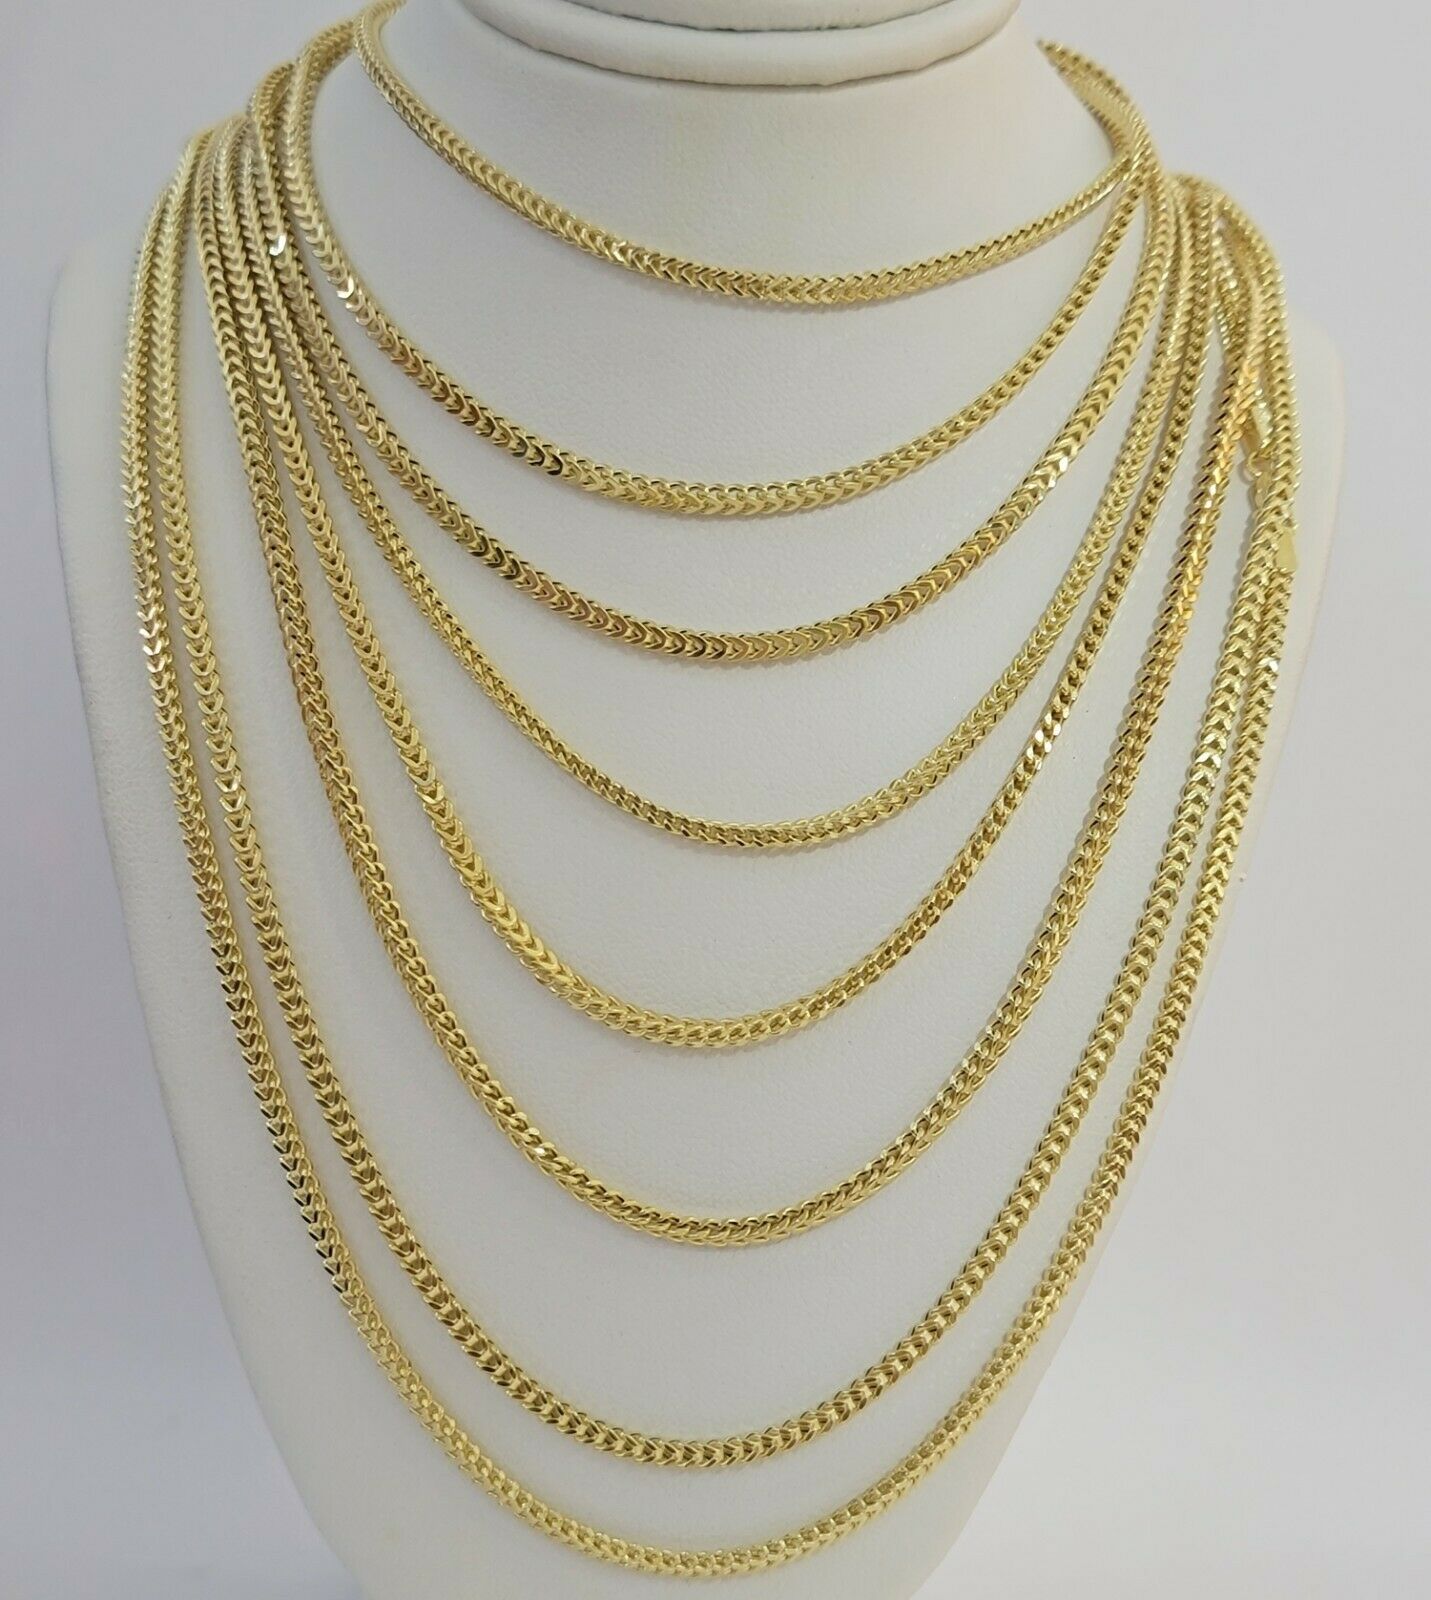 Real 10k Gold Franco chain Necklace 2.5mm 10KT Yellow Gold 16" -26" STRONG CHAIN